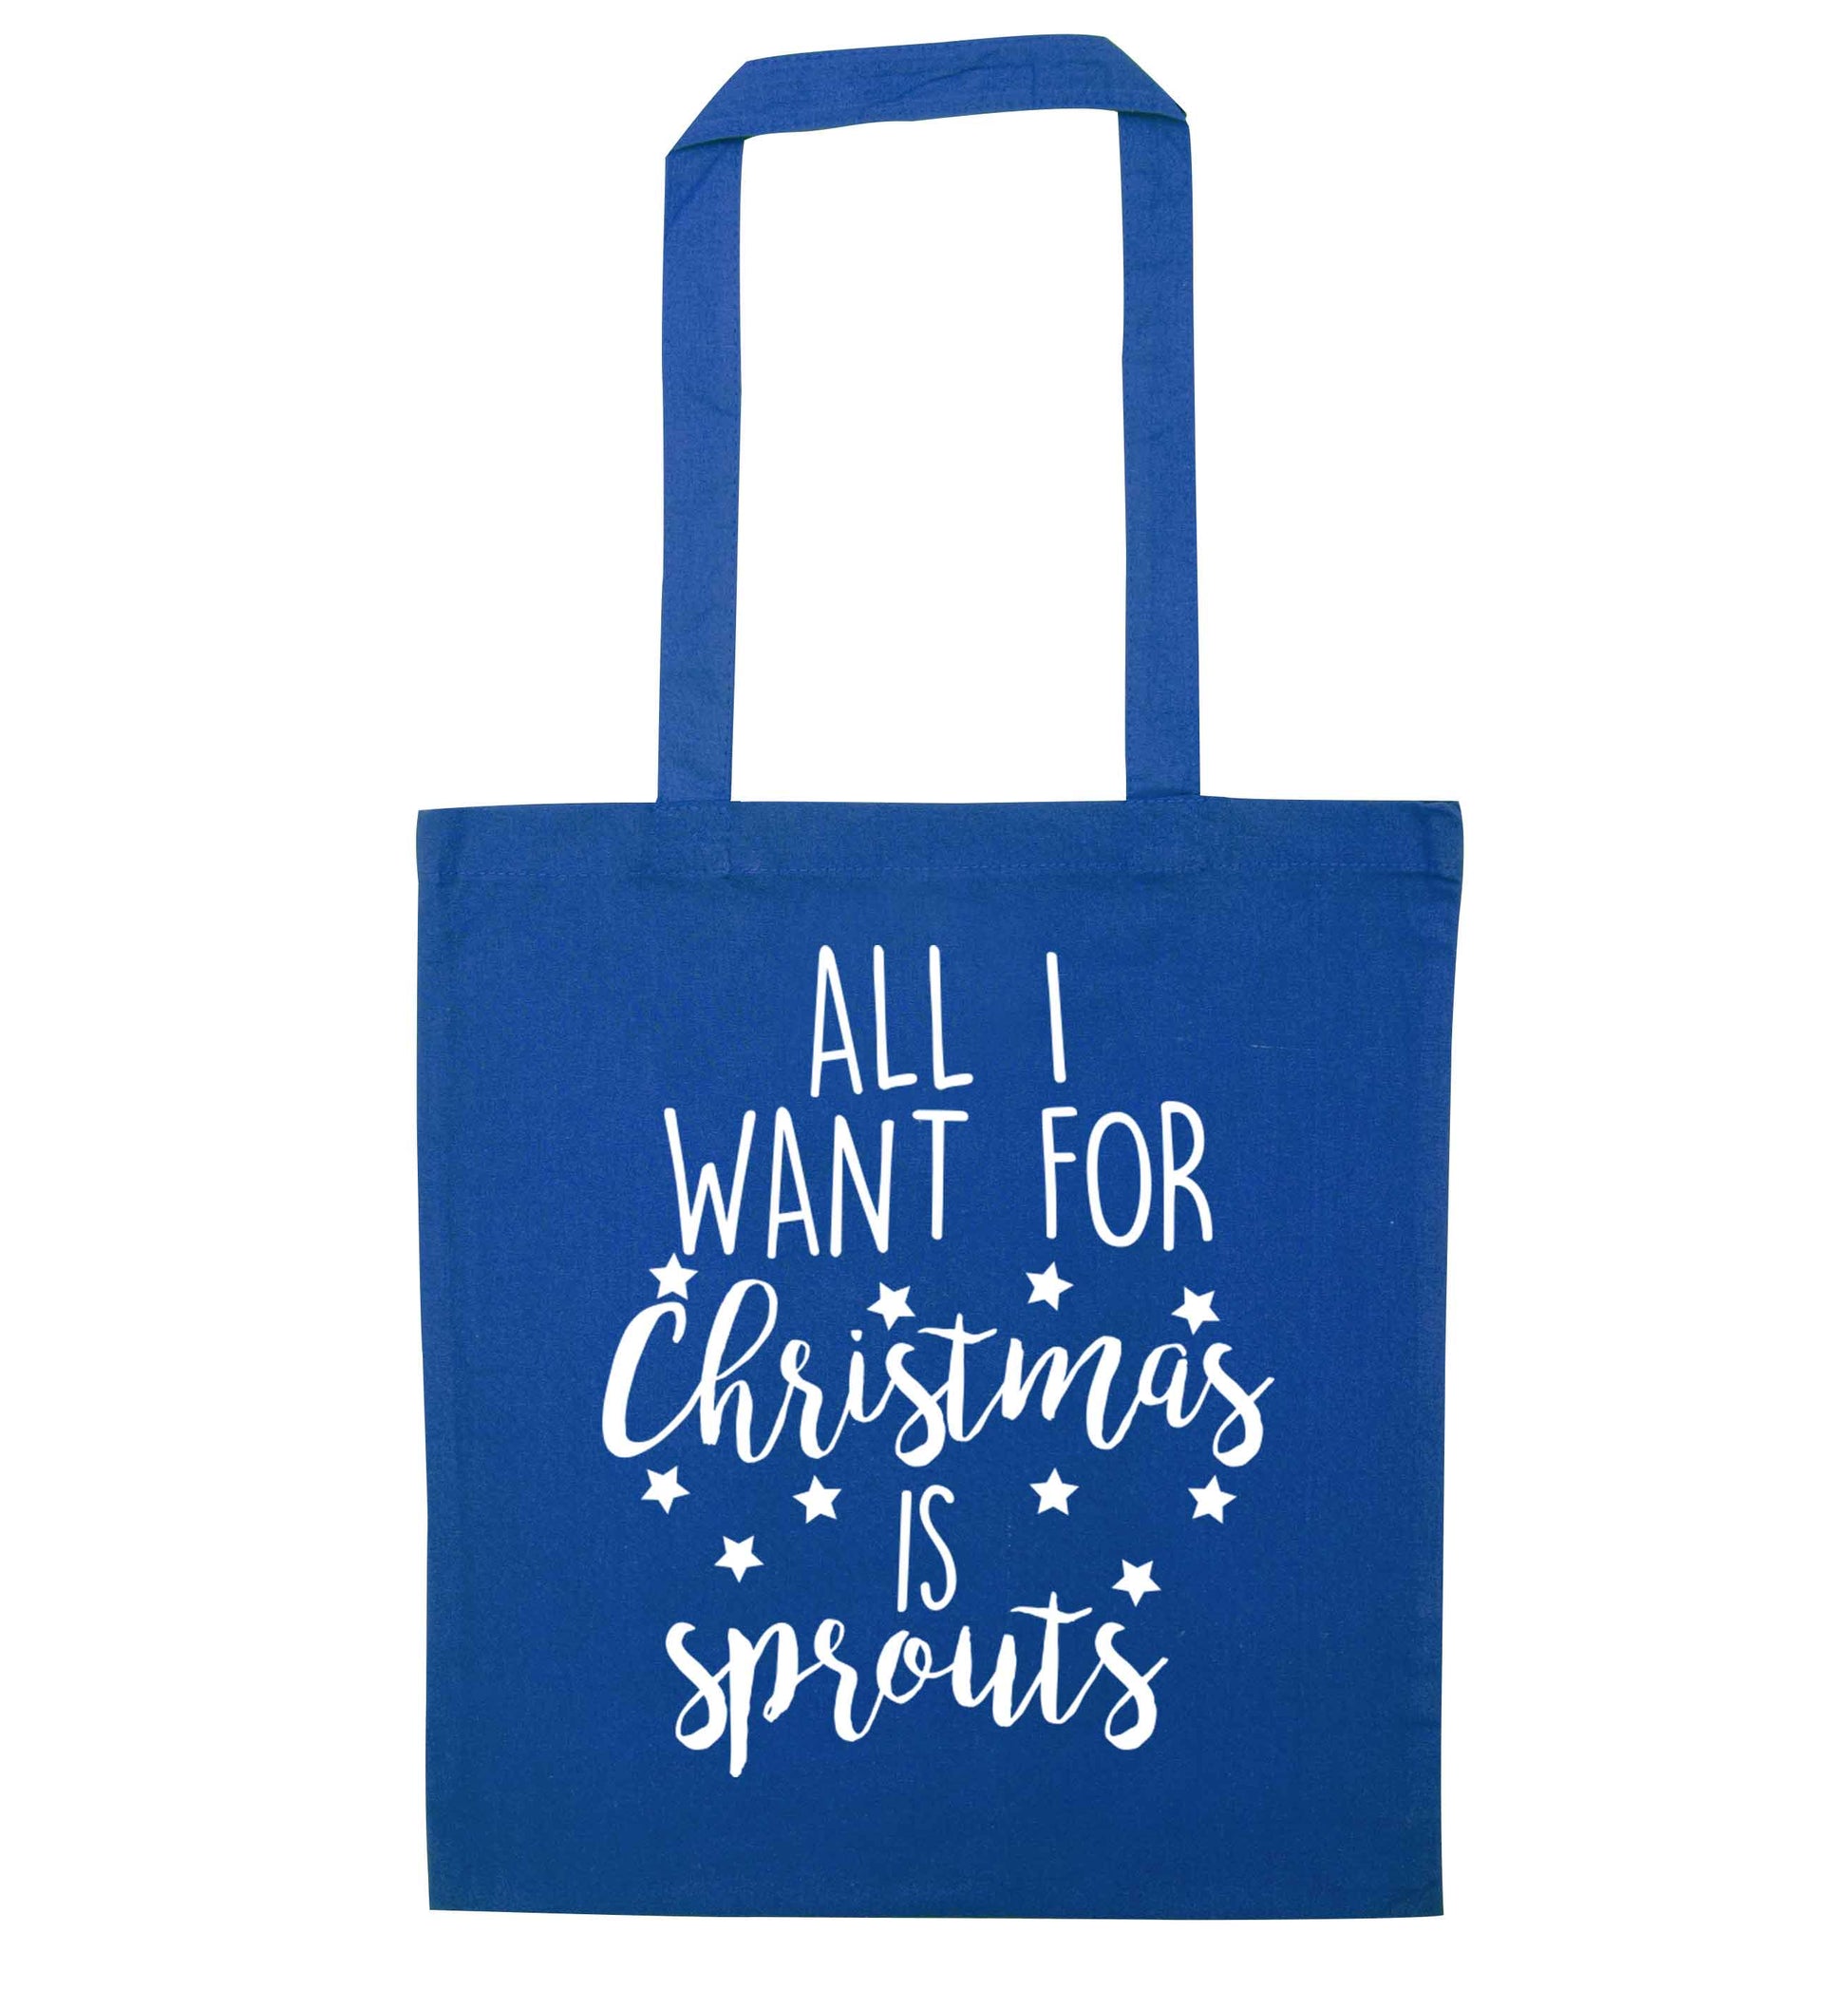 All I want for Christmas is sprouts blue tote bag